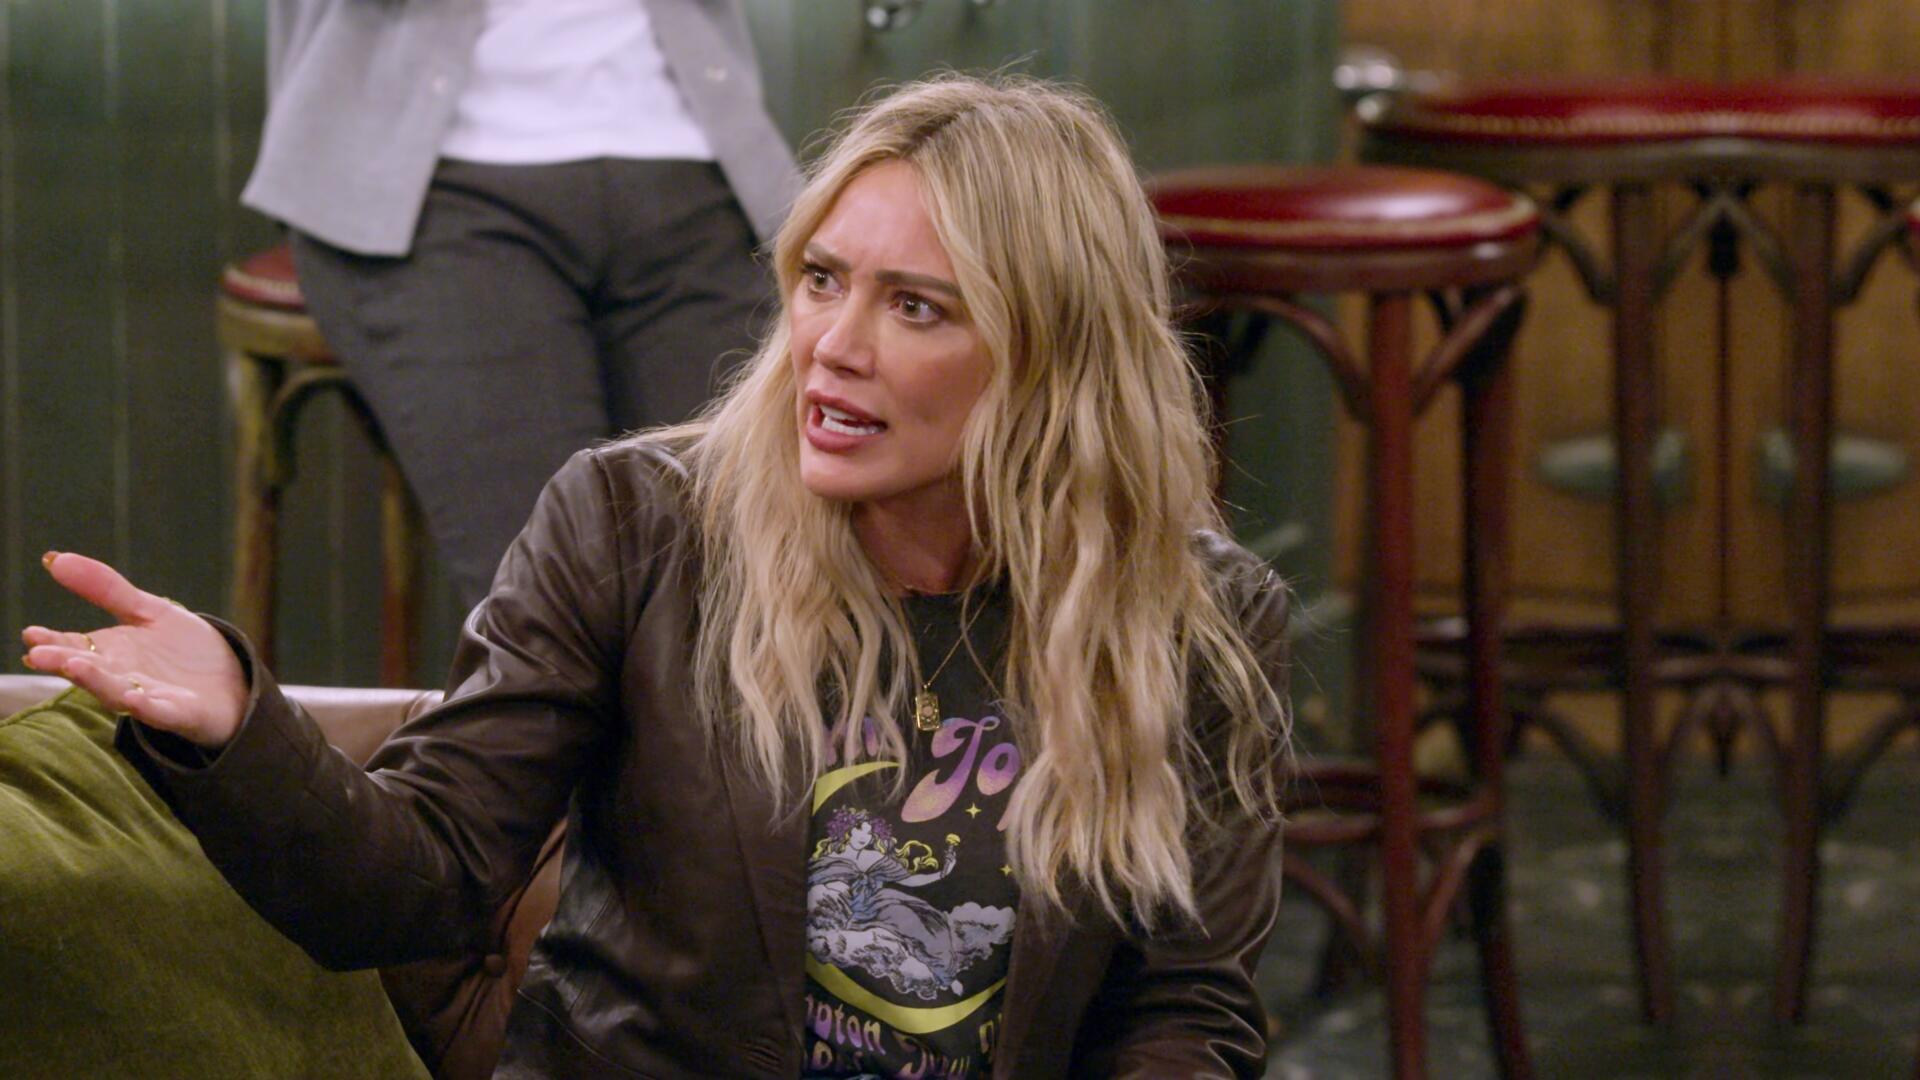 Hilary Duff – How I Met Your Father | Season 2 Episode 8